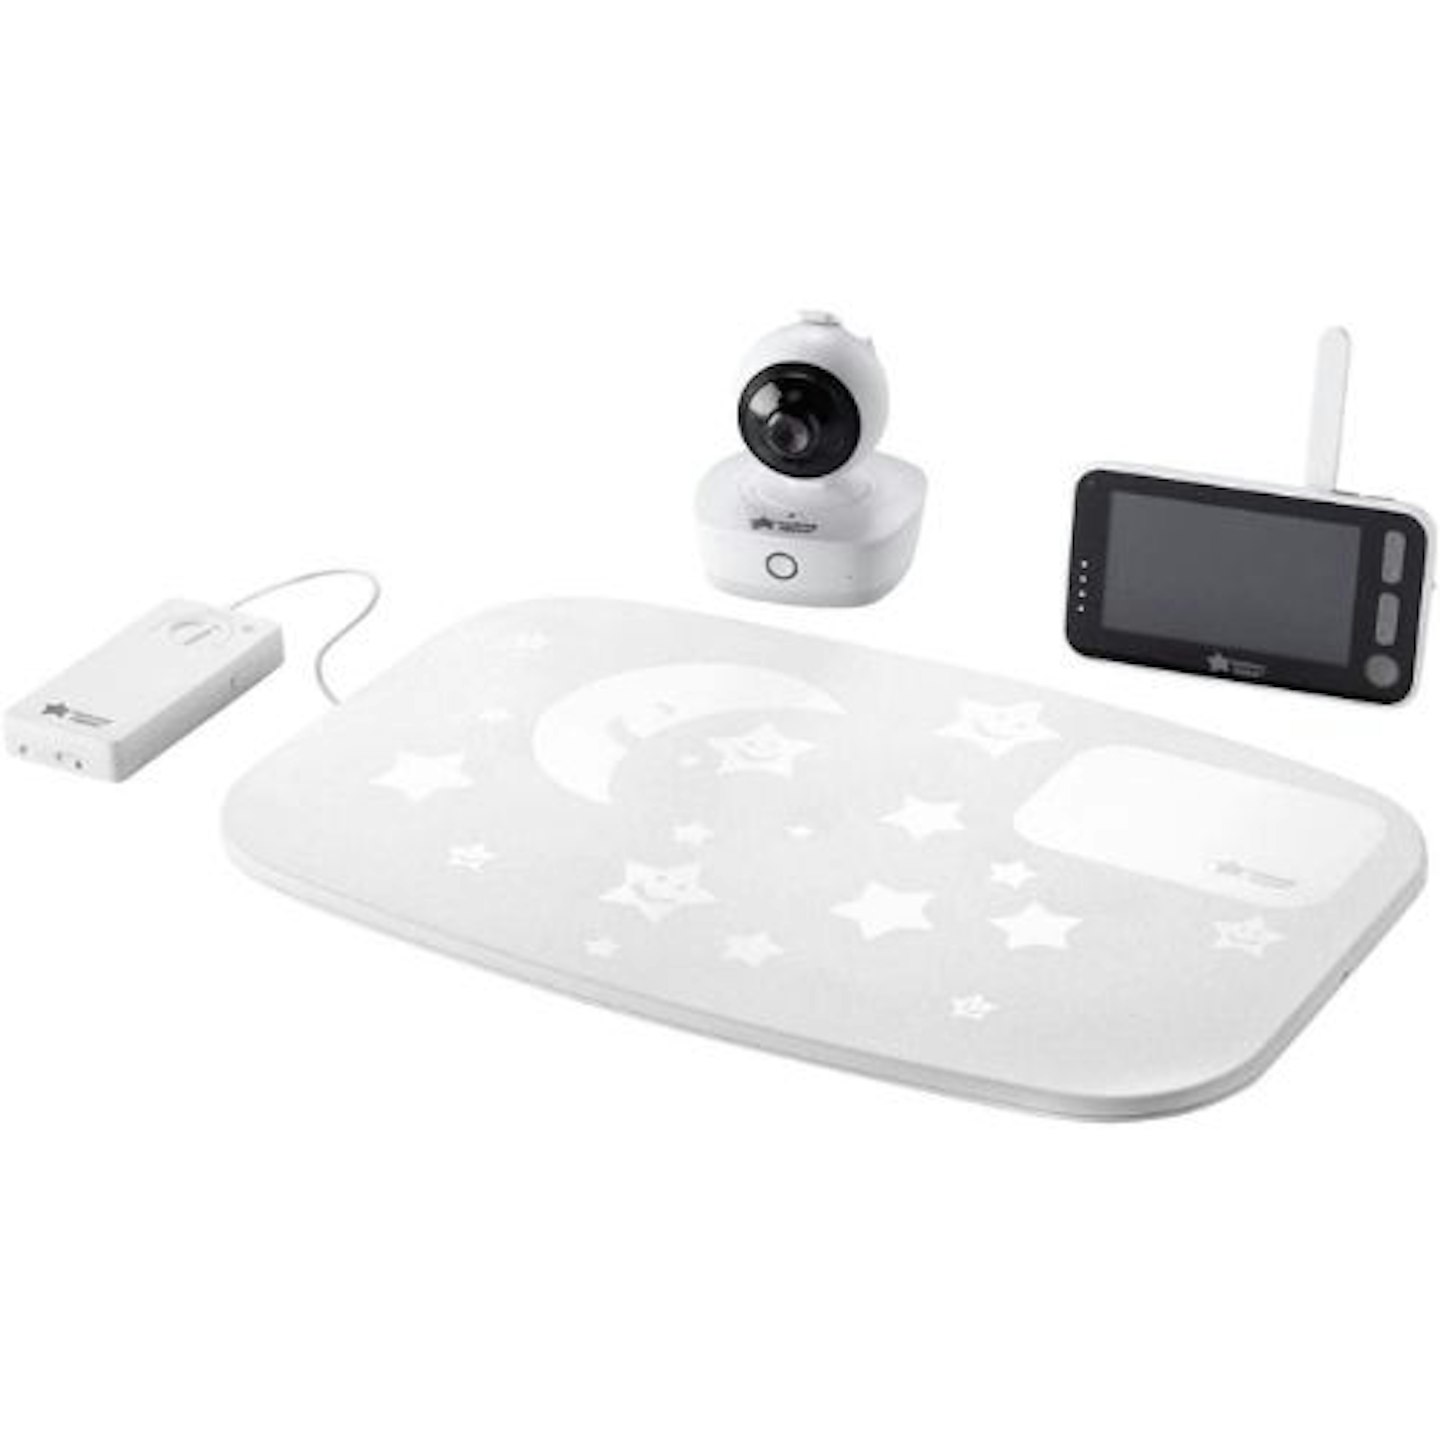 Tommee Tippee Dreamee Video Baby Monitor with Camera